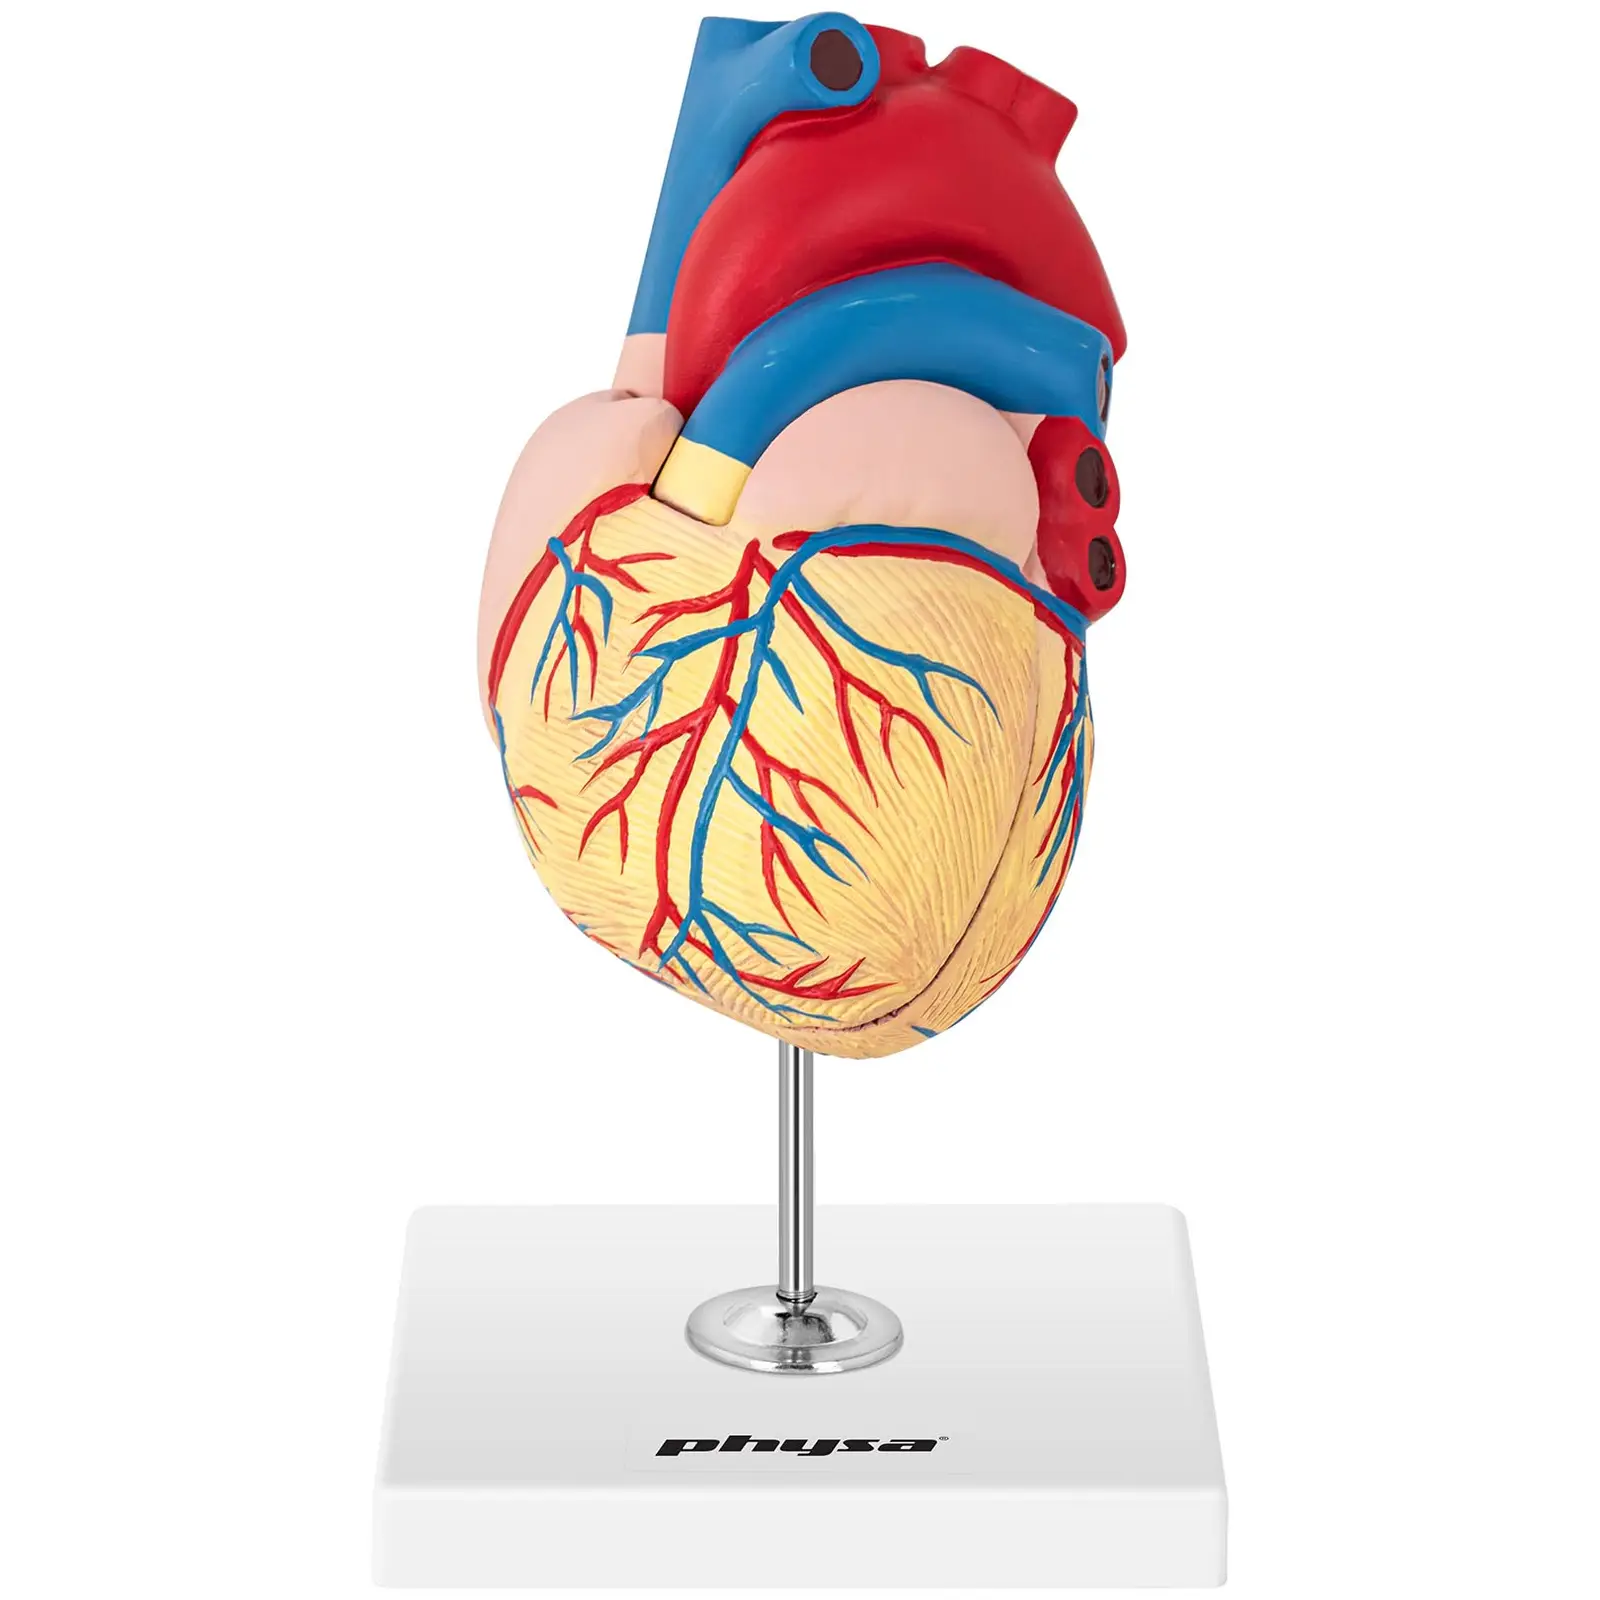 Heart Model - separable into 2 parts - life-sized